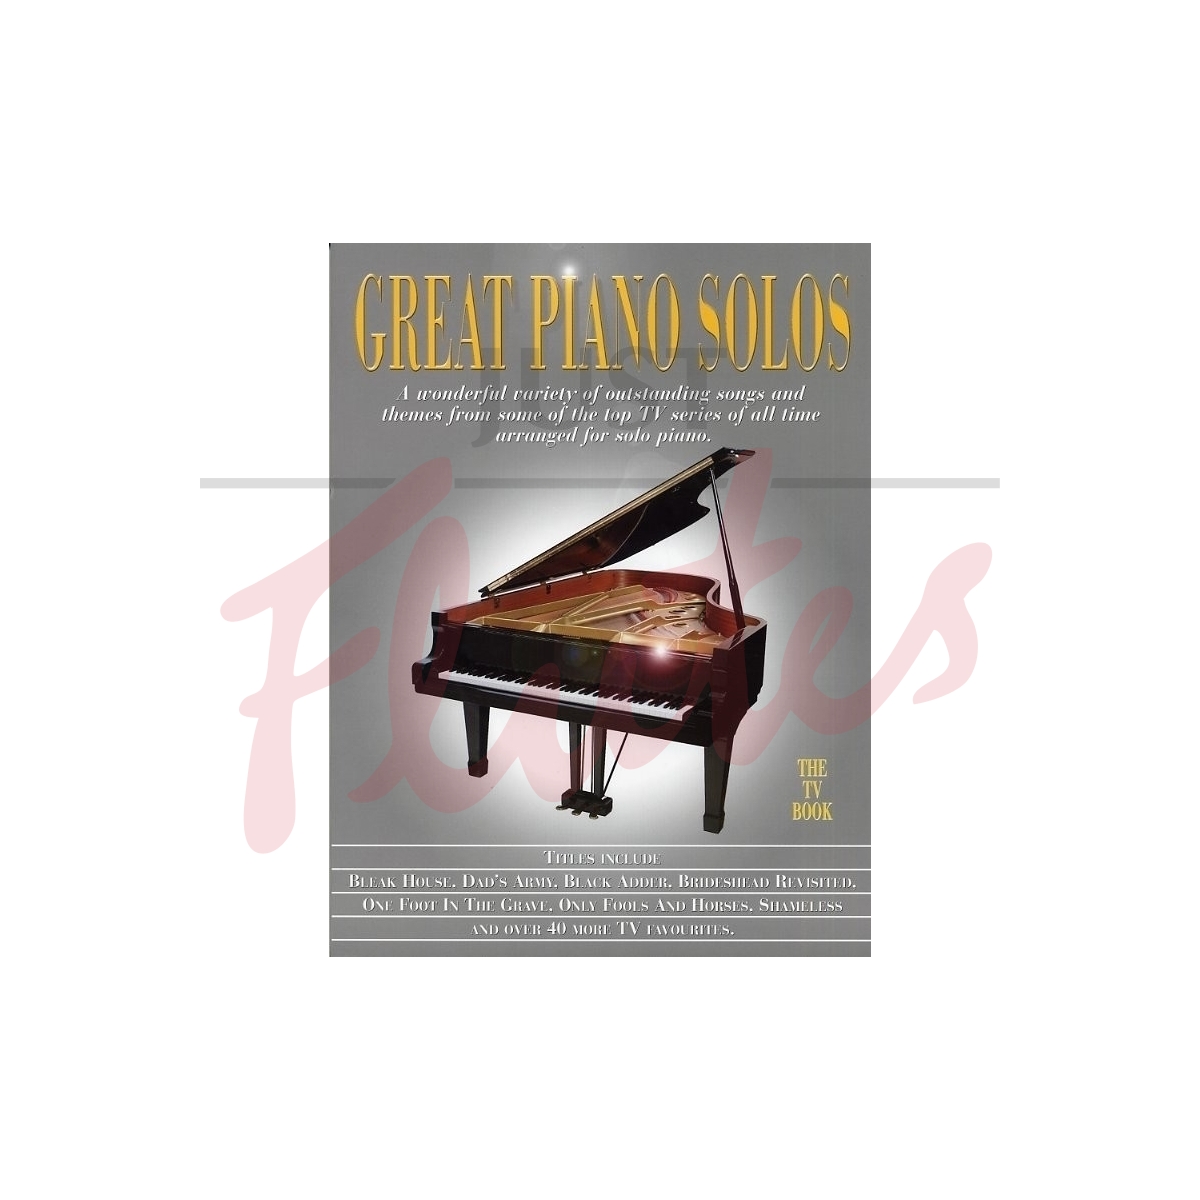 Great Piano Solos: The TV Book